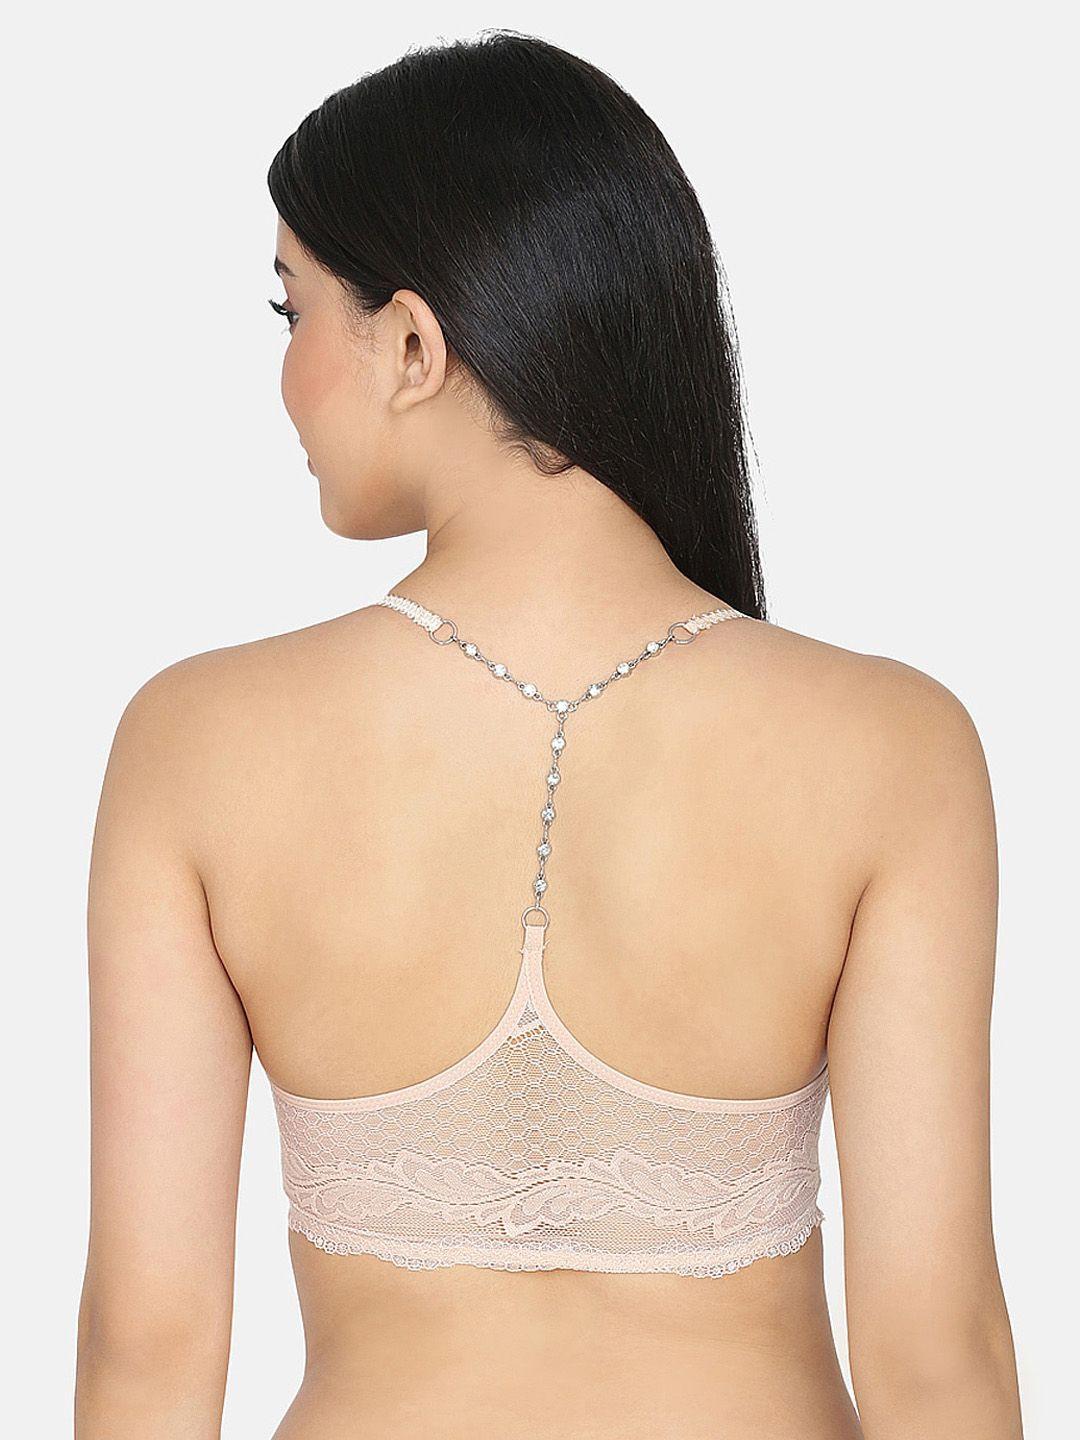 da-intimo-beige-lace-non-wired-lightly-padded-jewel-back-bralette